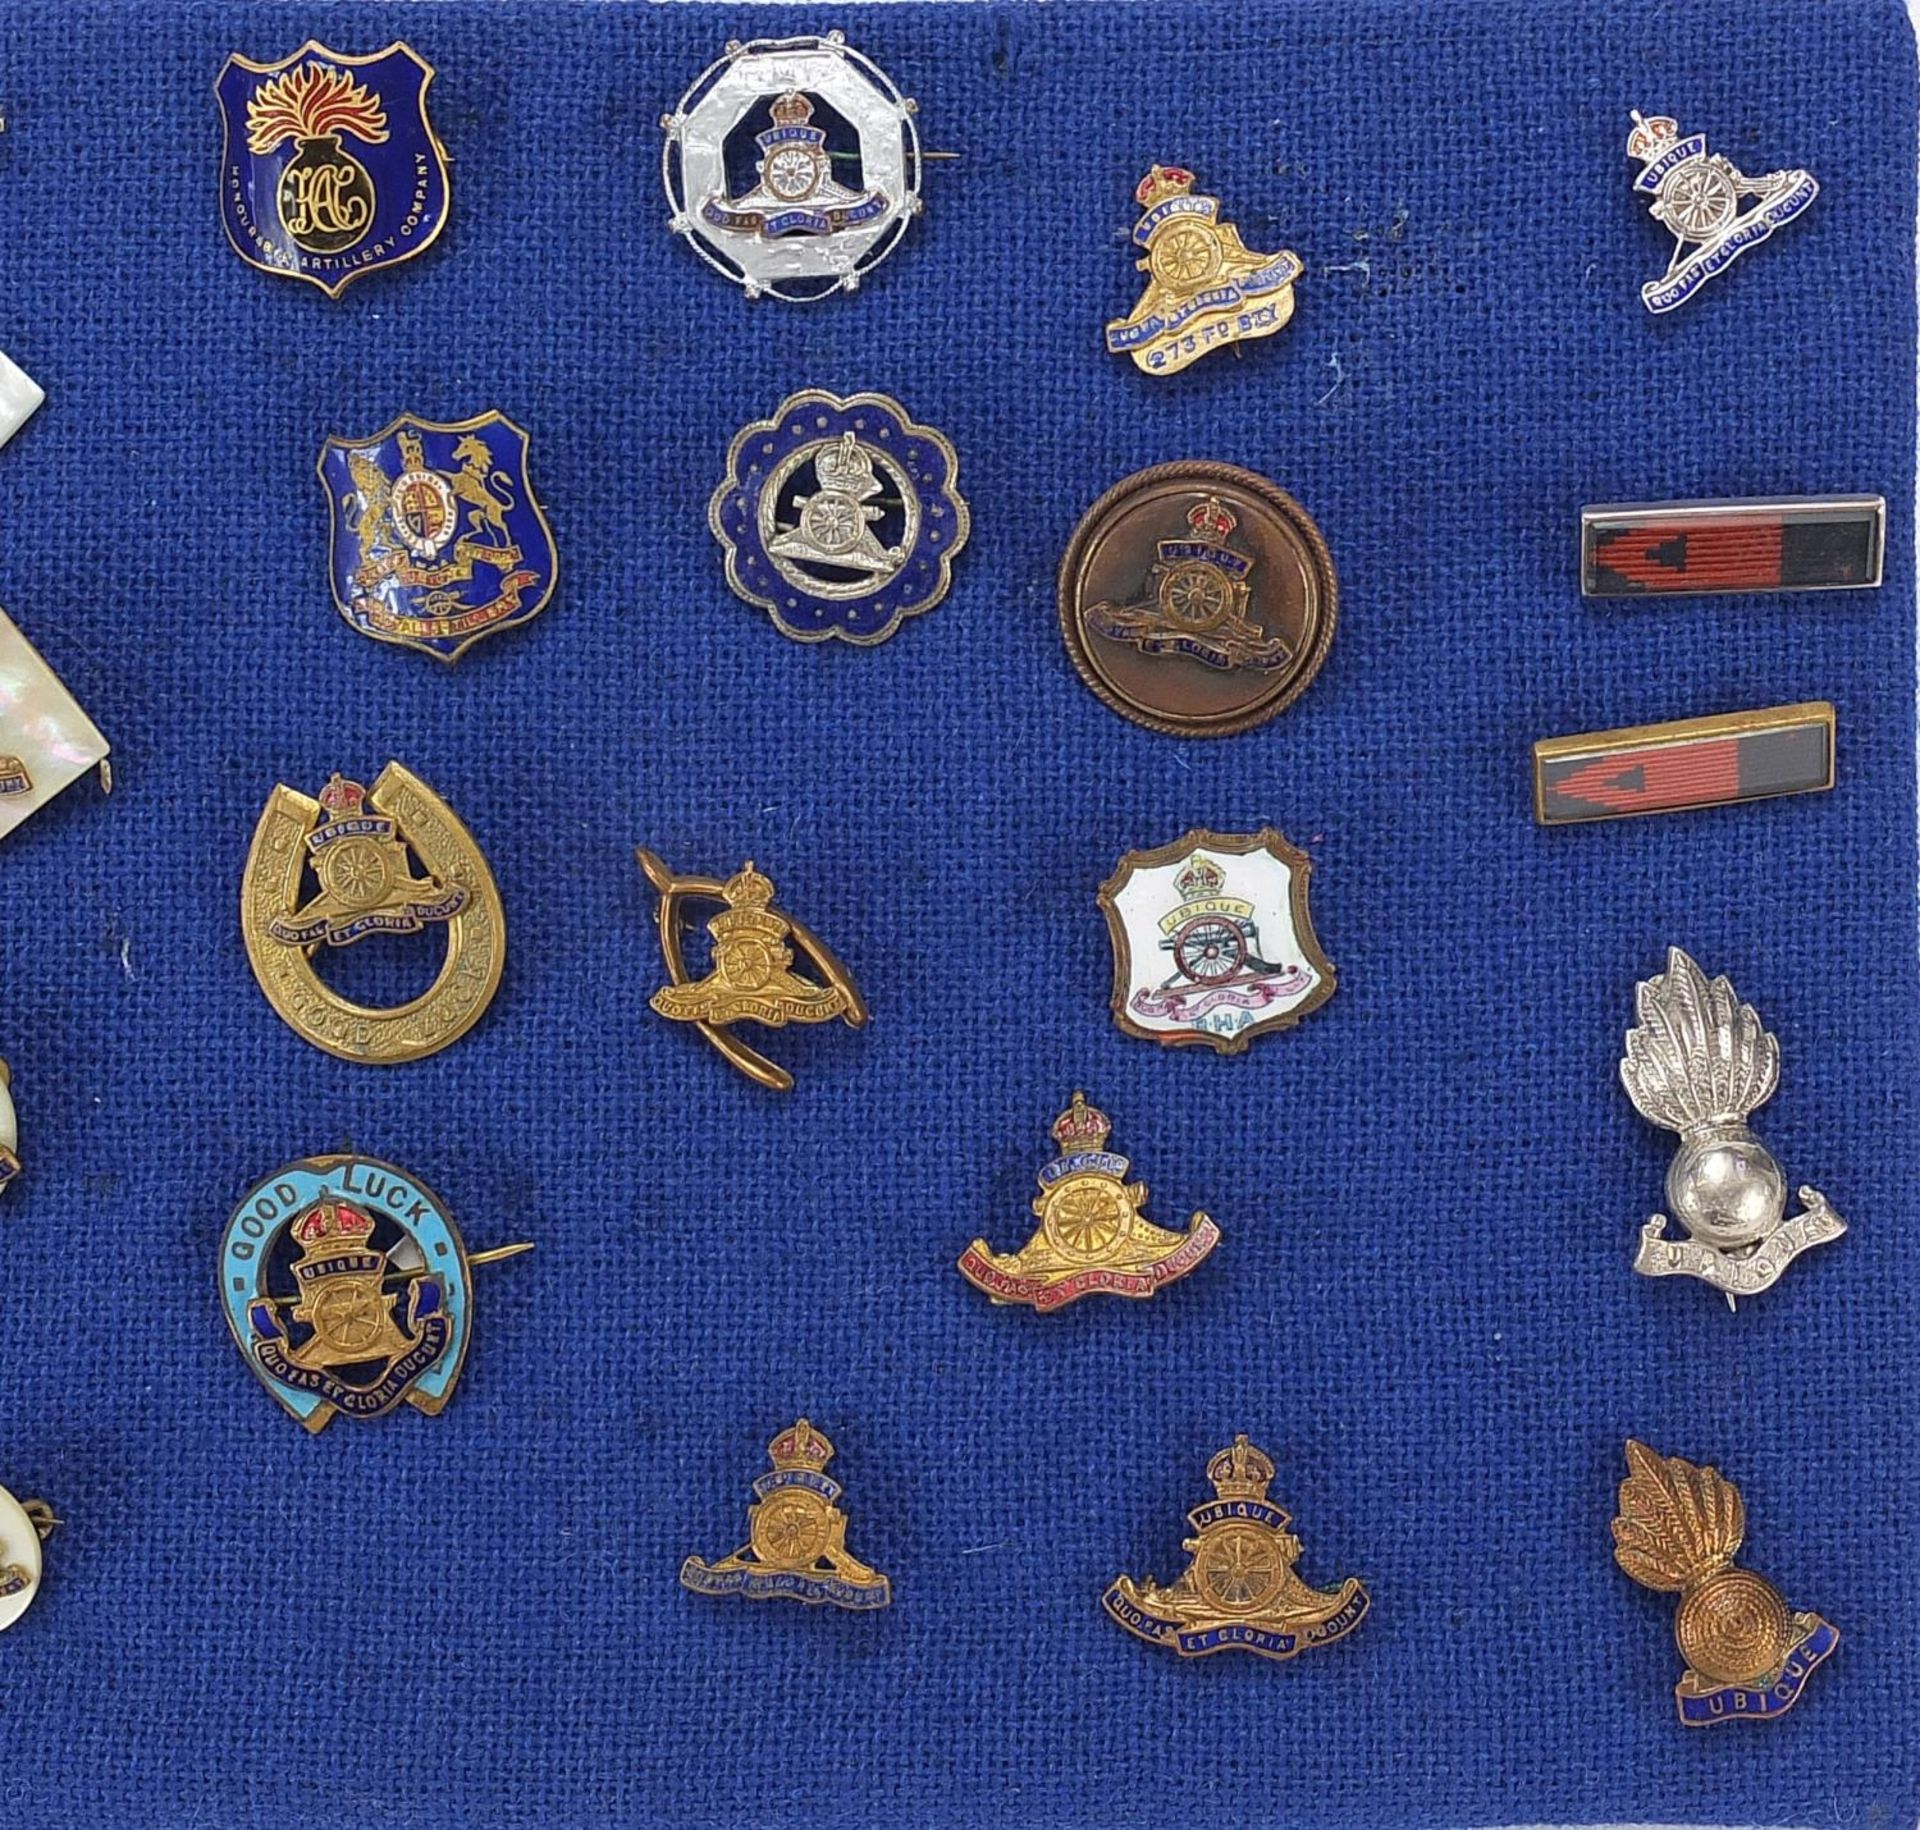 Twenty six British military Royal Artillery badges and bars, including enamel and silver examples - Image 3 of 9